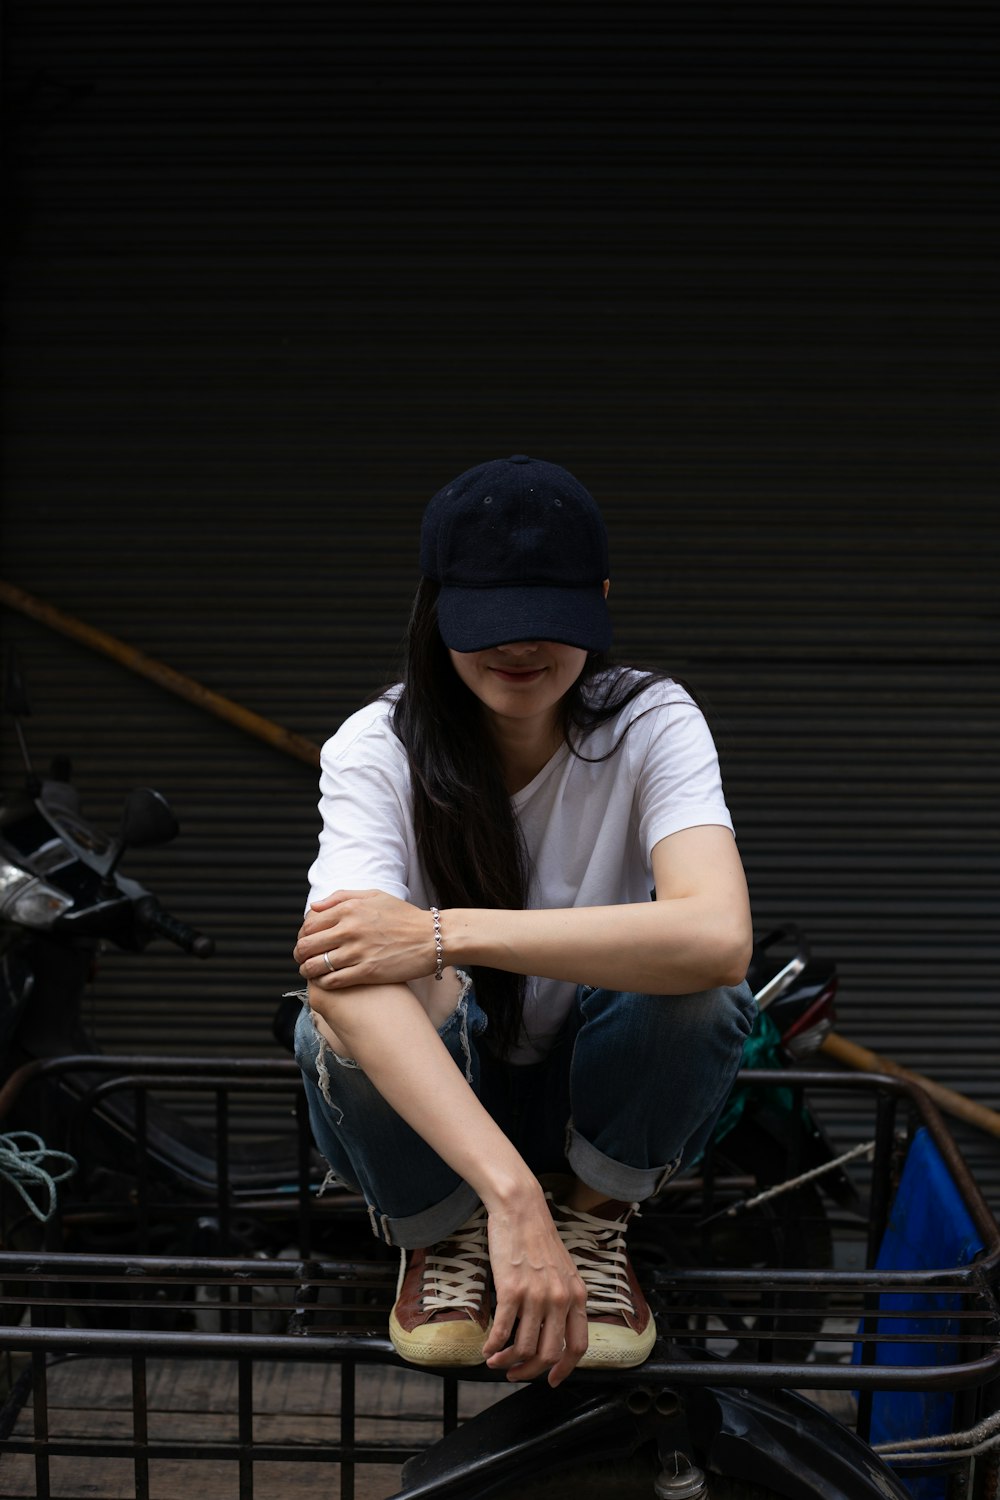 man in white t-shirt and blue cap sitting on black motorcycle